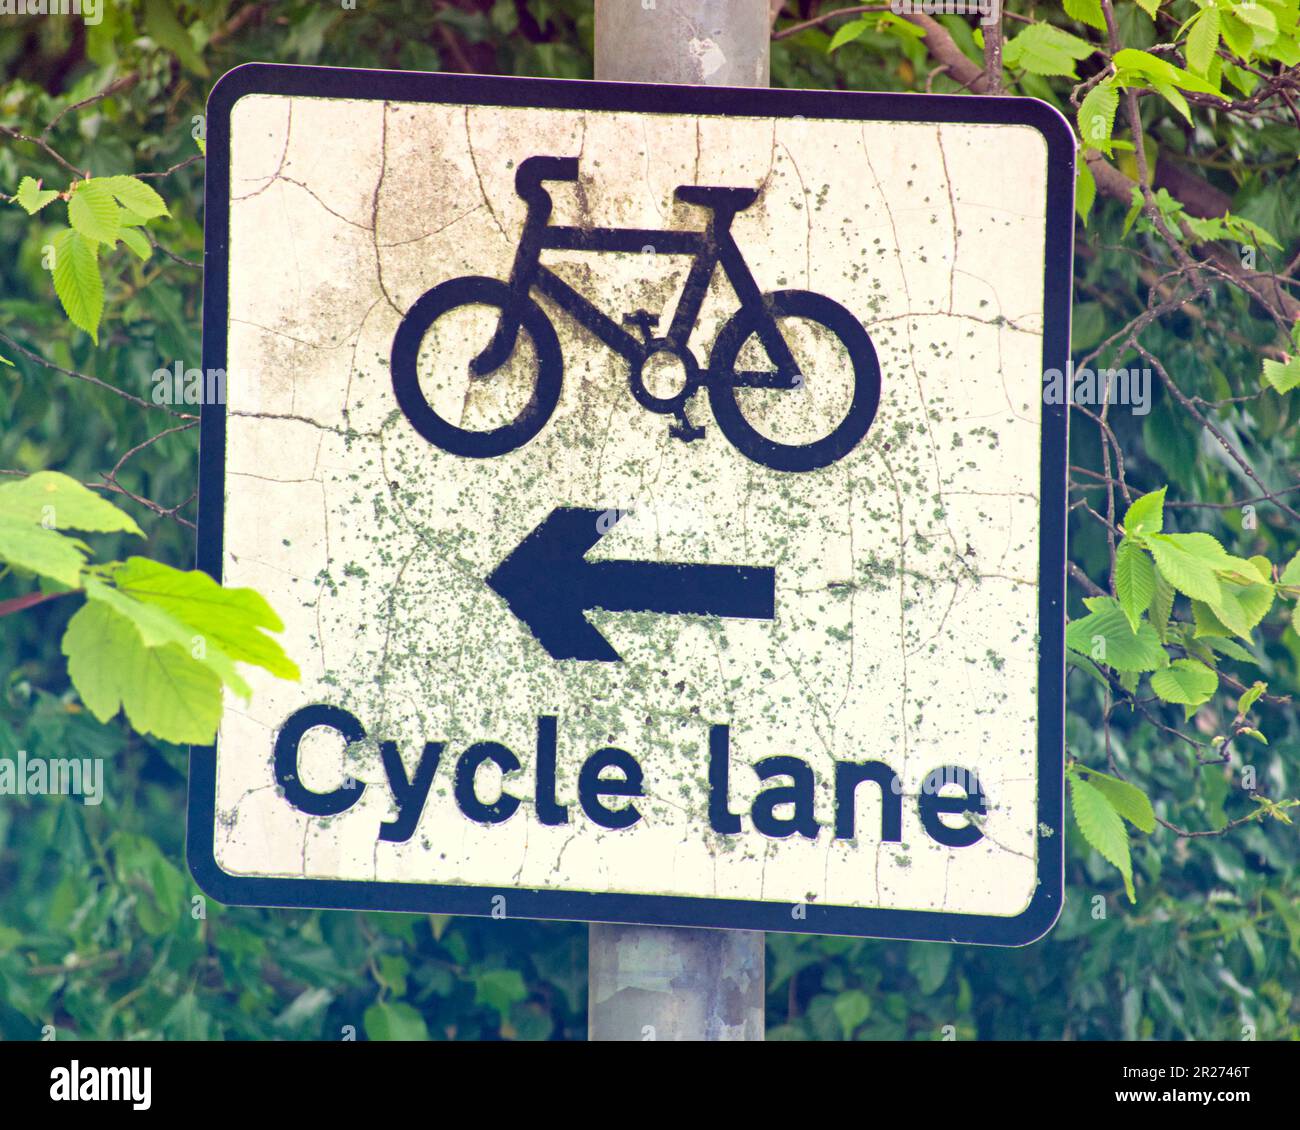 cycle lane sign in trees tree Stock Photo